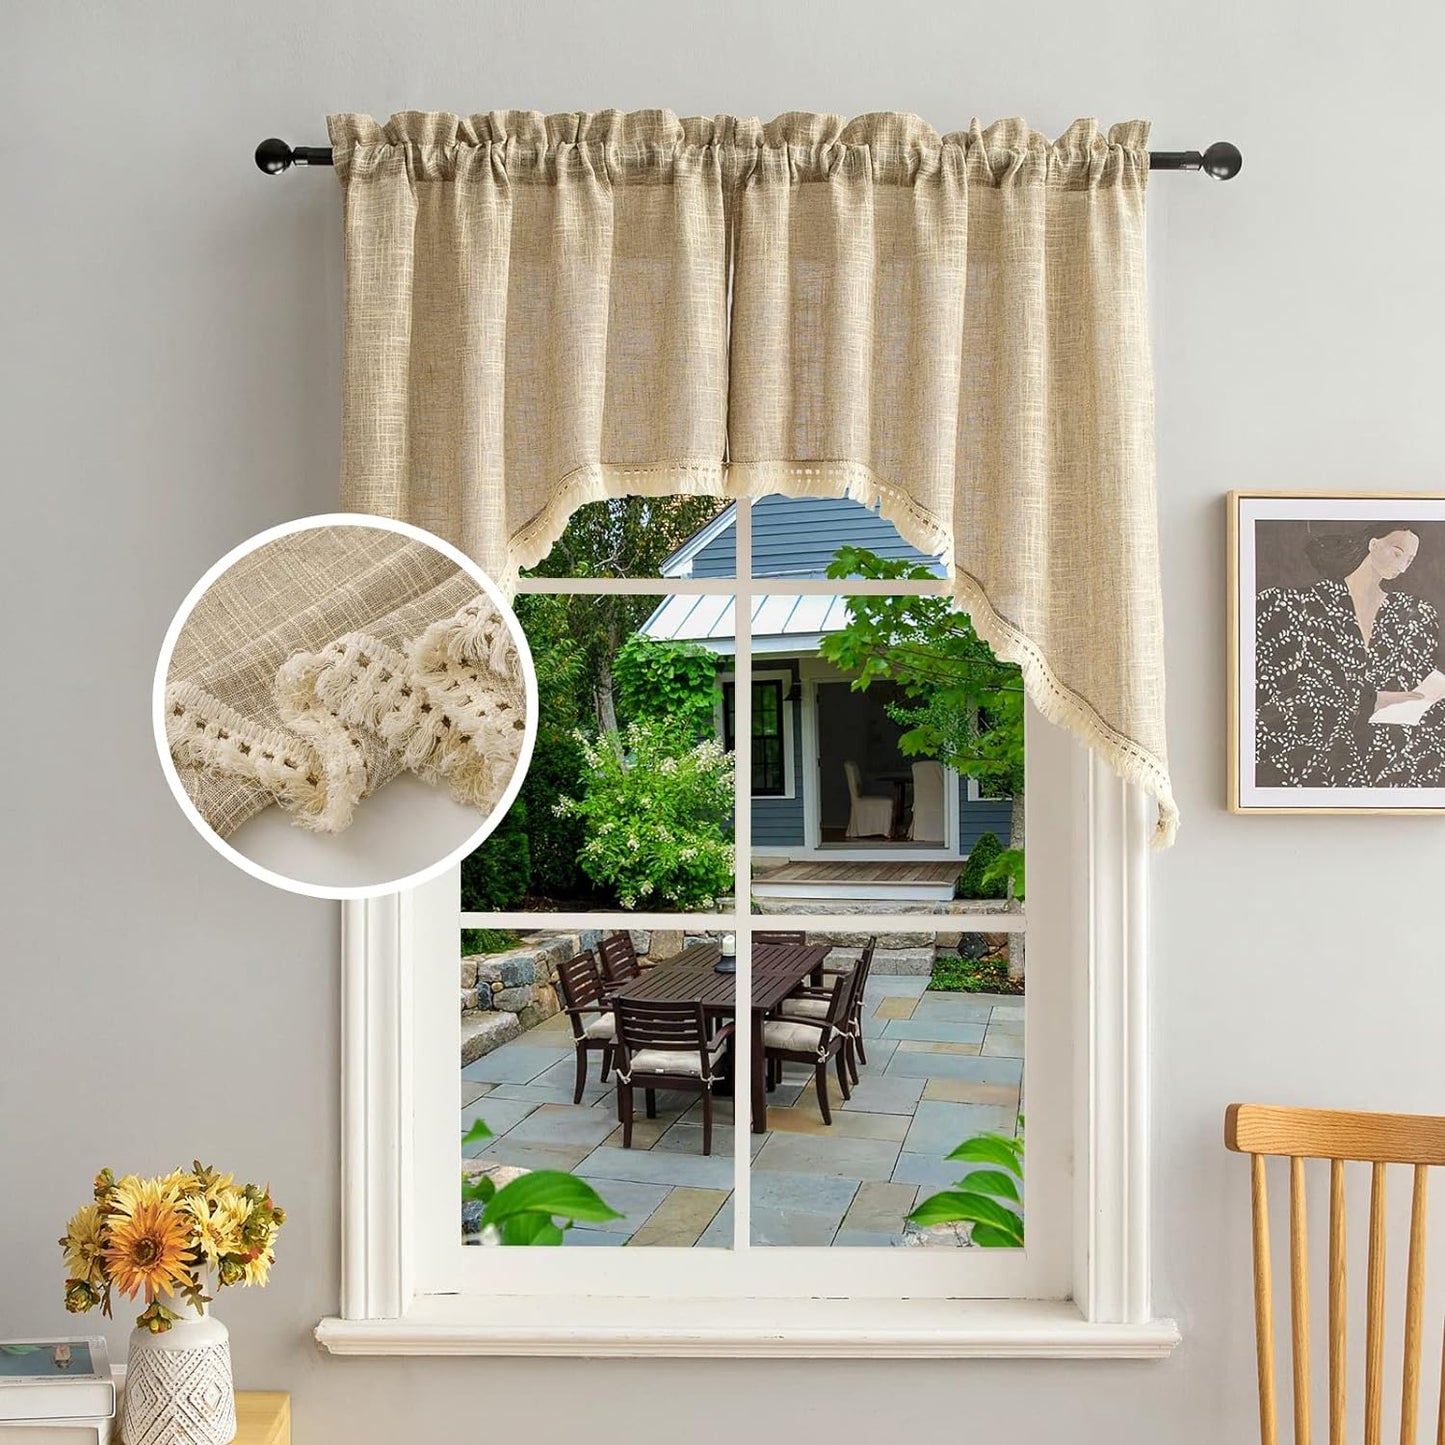 Beda Home Tassel Linen Textured Swag Curtain Valance for Farmhouses’ Kitchen; Light Filtering Rustic Short Swag Topper for Small Windows Bedroom Privacy Added Rod Pocket Design(Nature 36X63-2Pcs)  BD BEDA HOME Taupe 36Wx36L - 2 Panels 